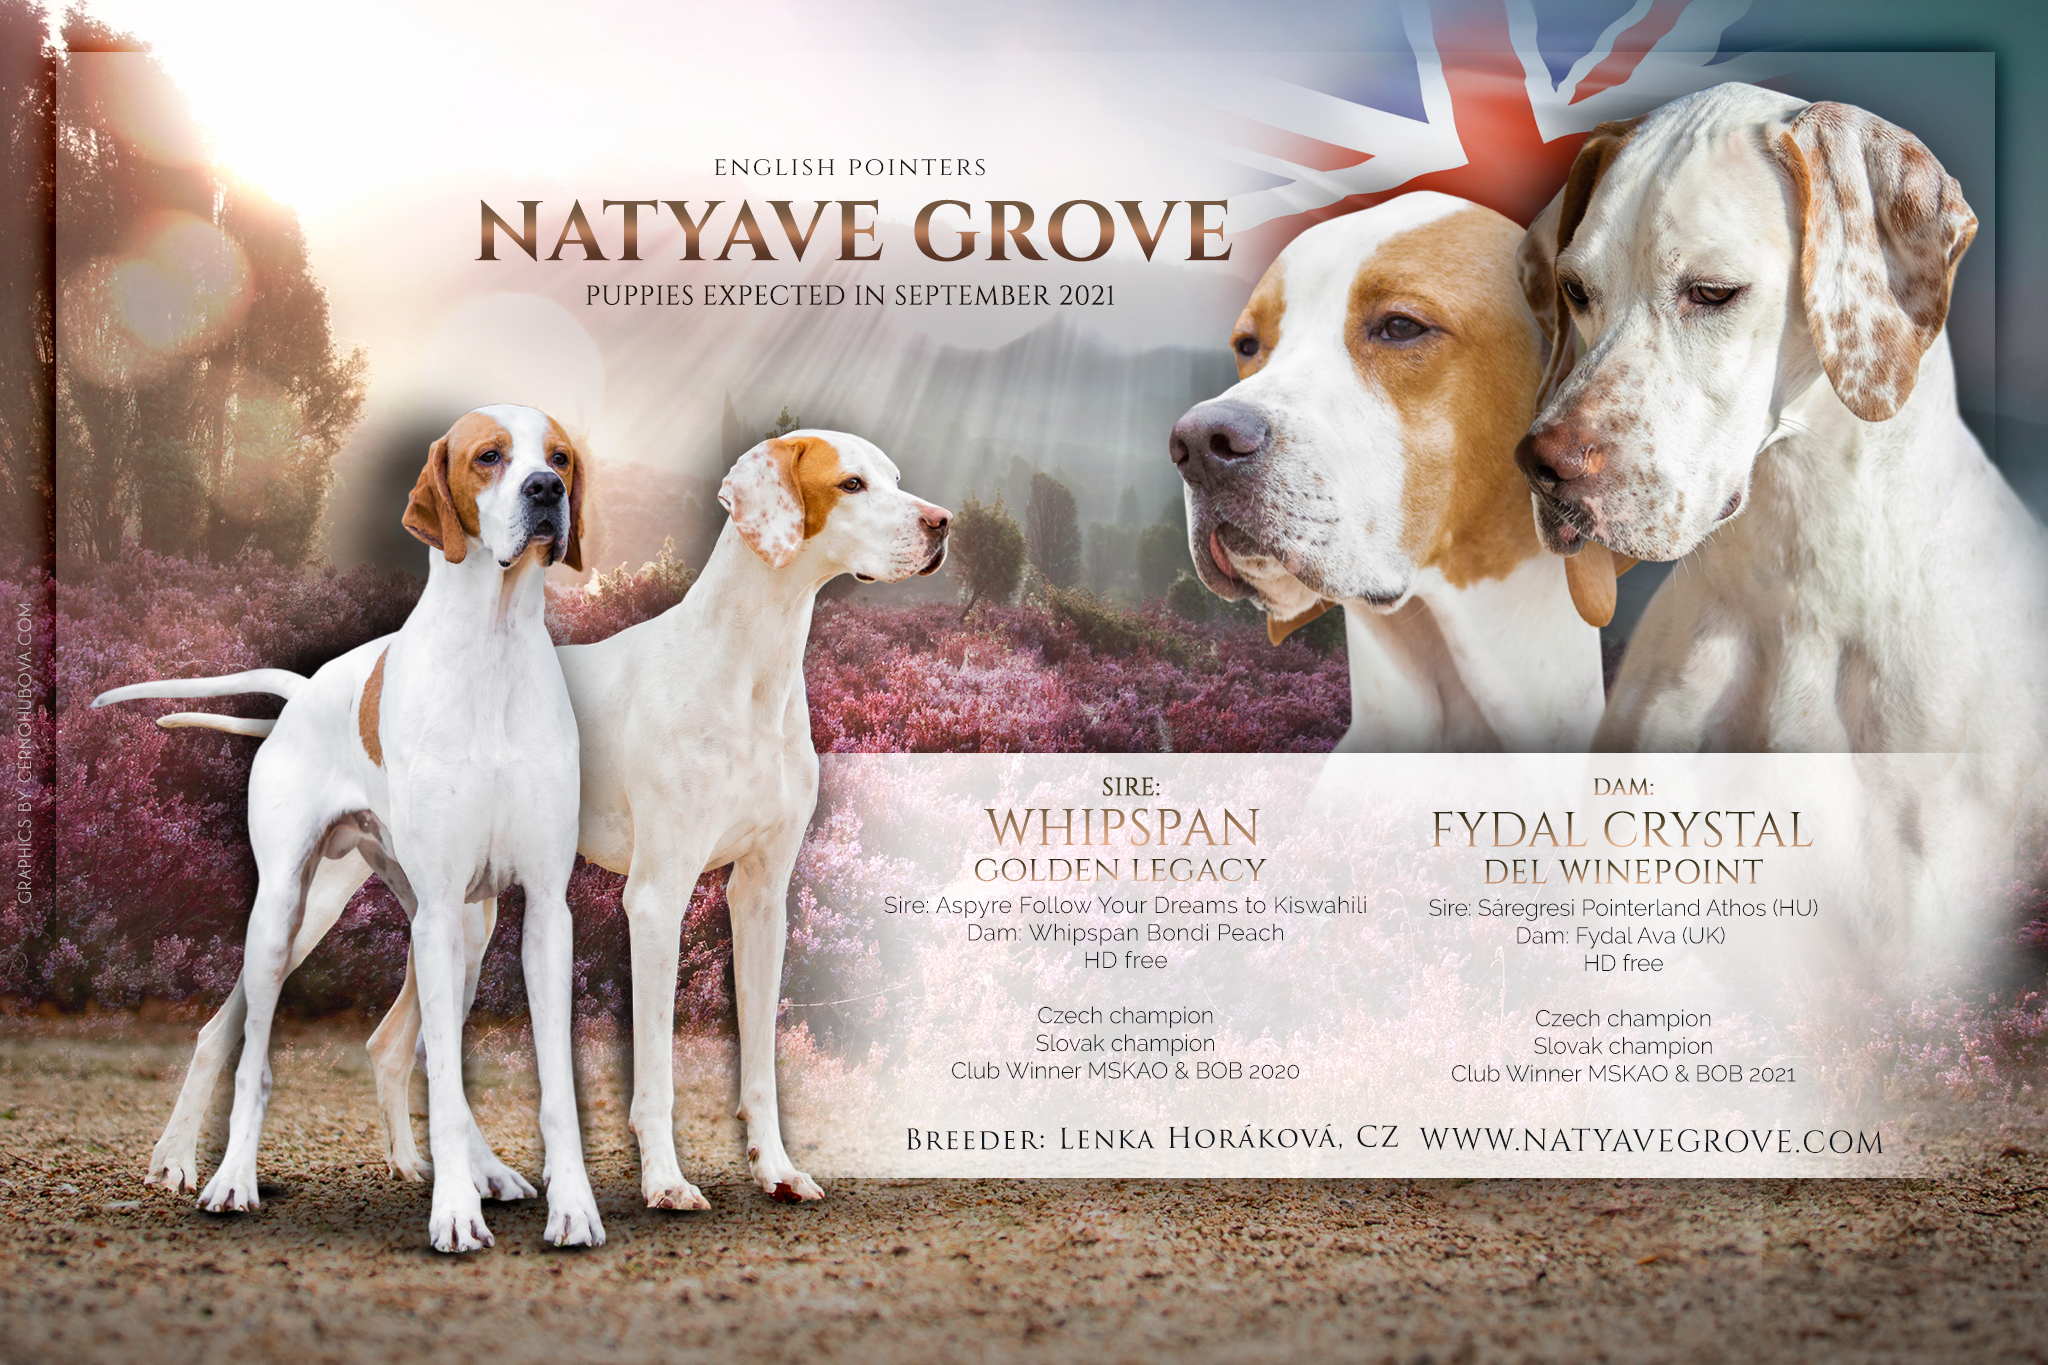 English Pointer Fydal Crystal del Winepoint